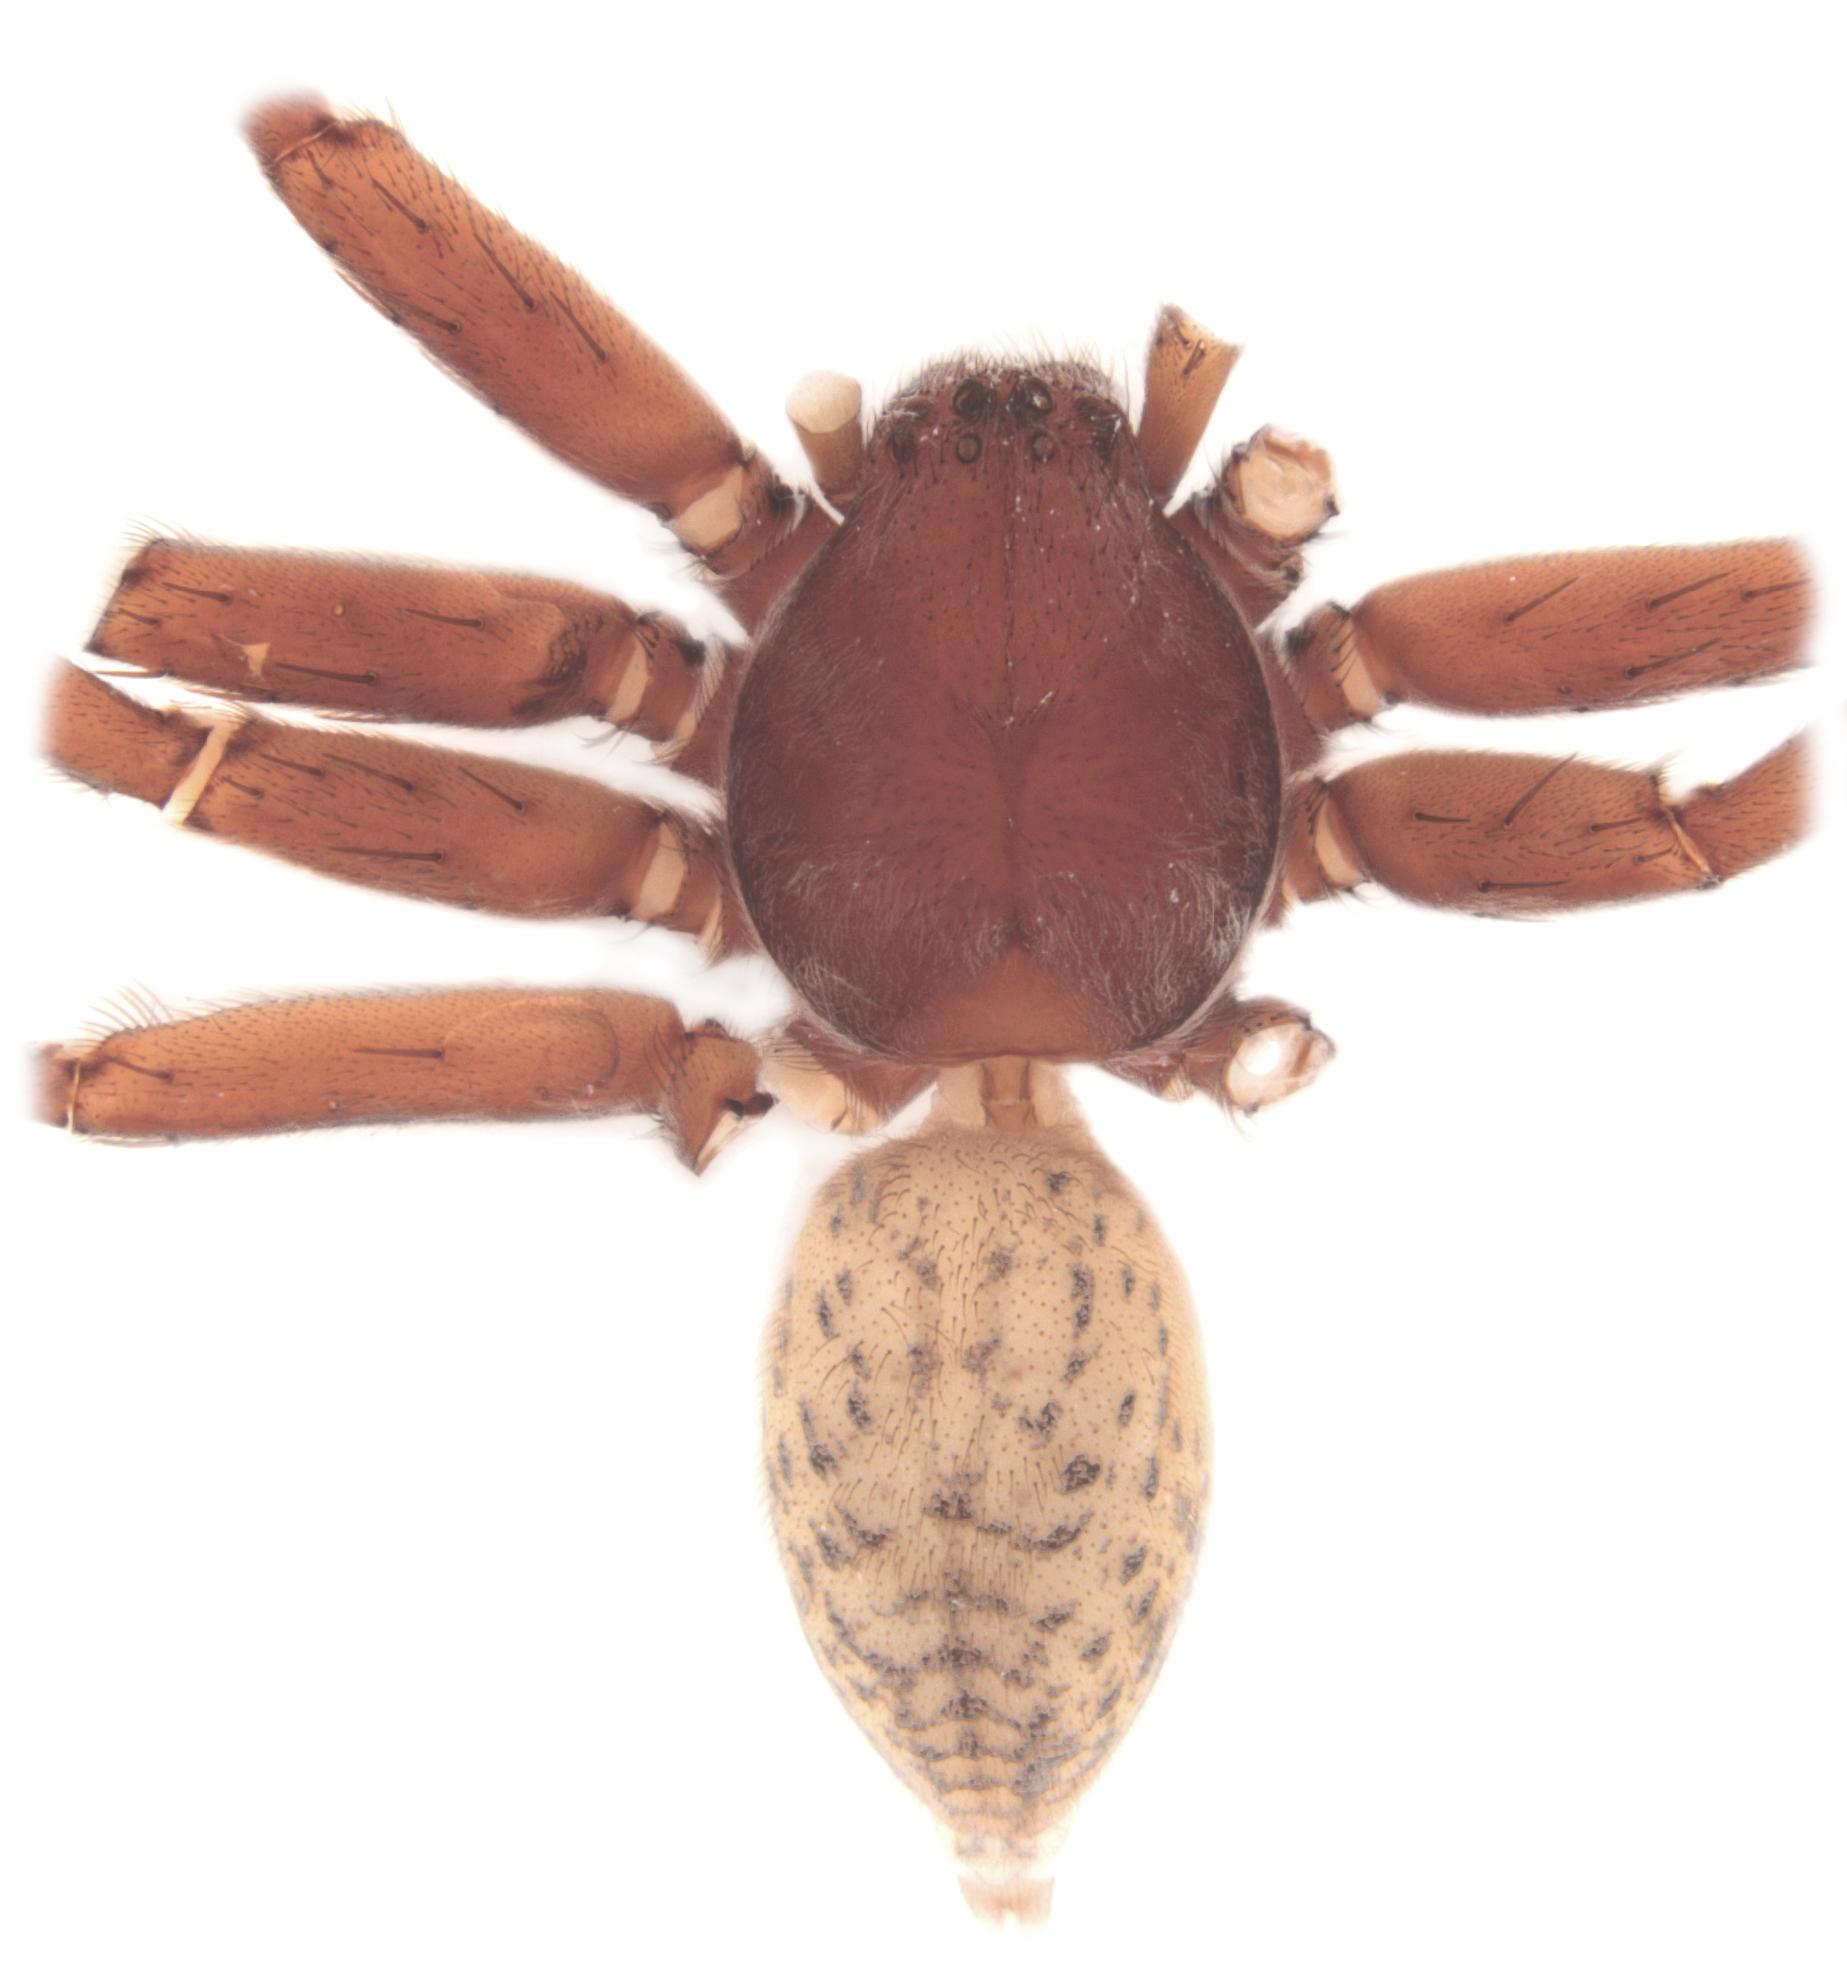 a brown spider is shown over a white background